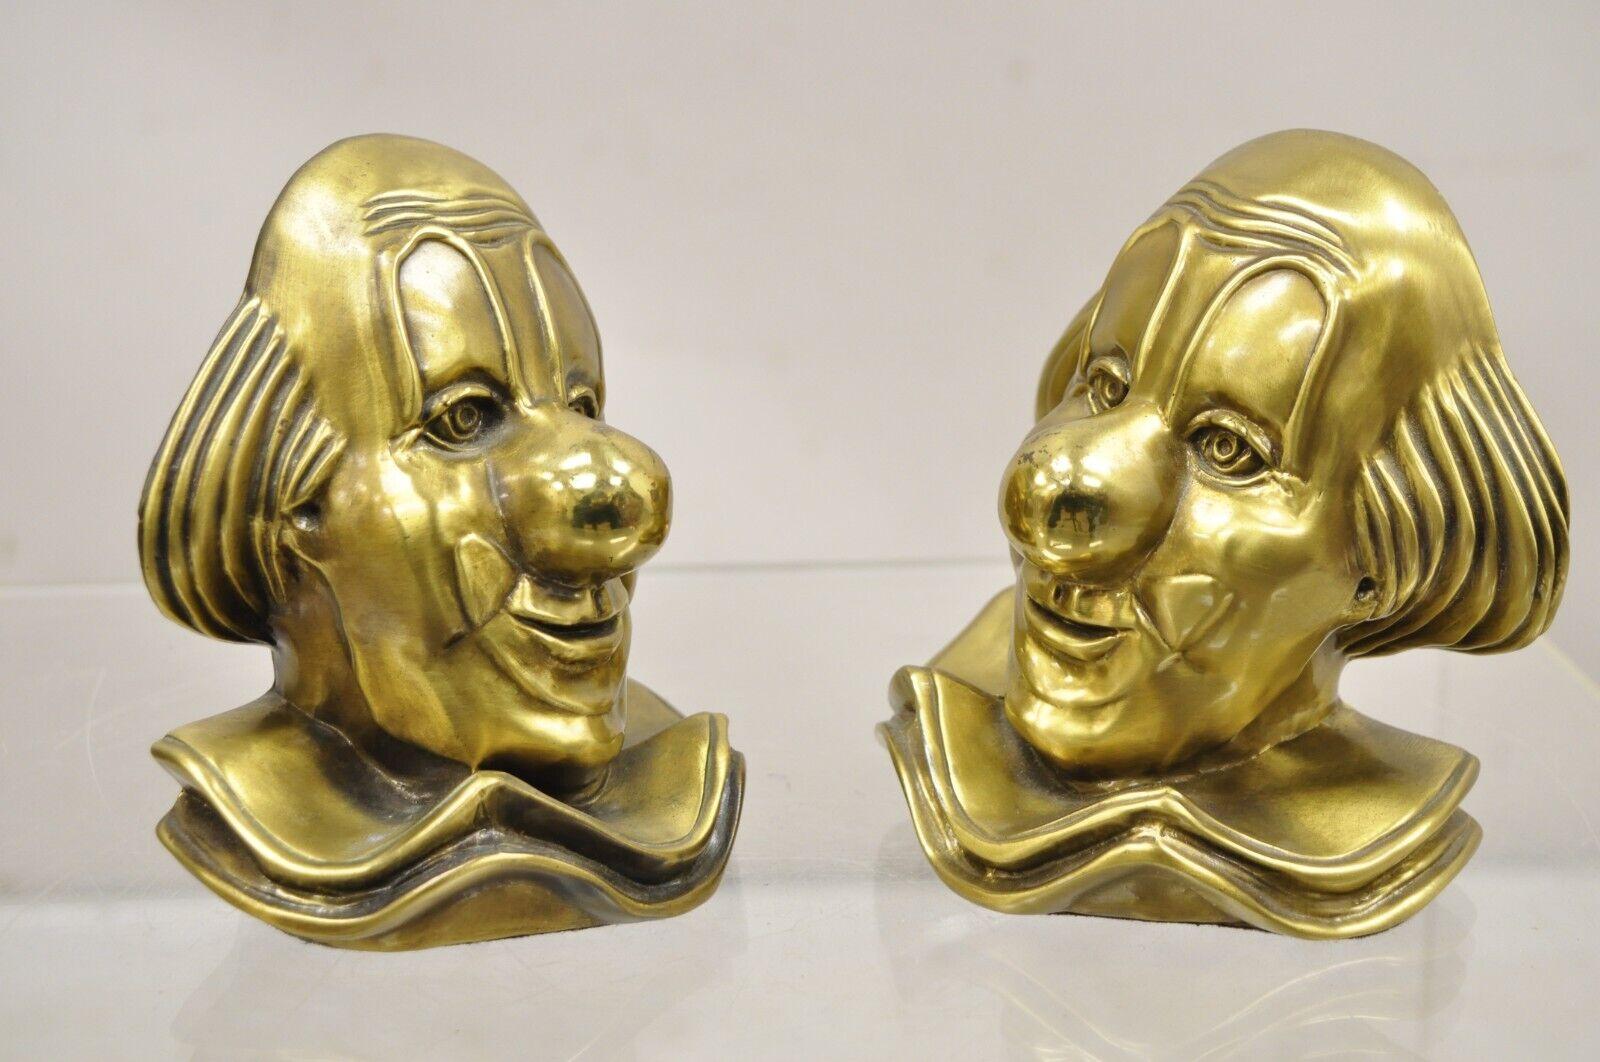 Vintage PM Craftsman Brass Figural Clown Bookends - A Pair For Sale 4